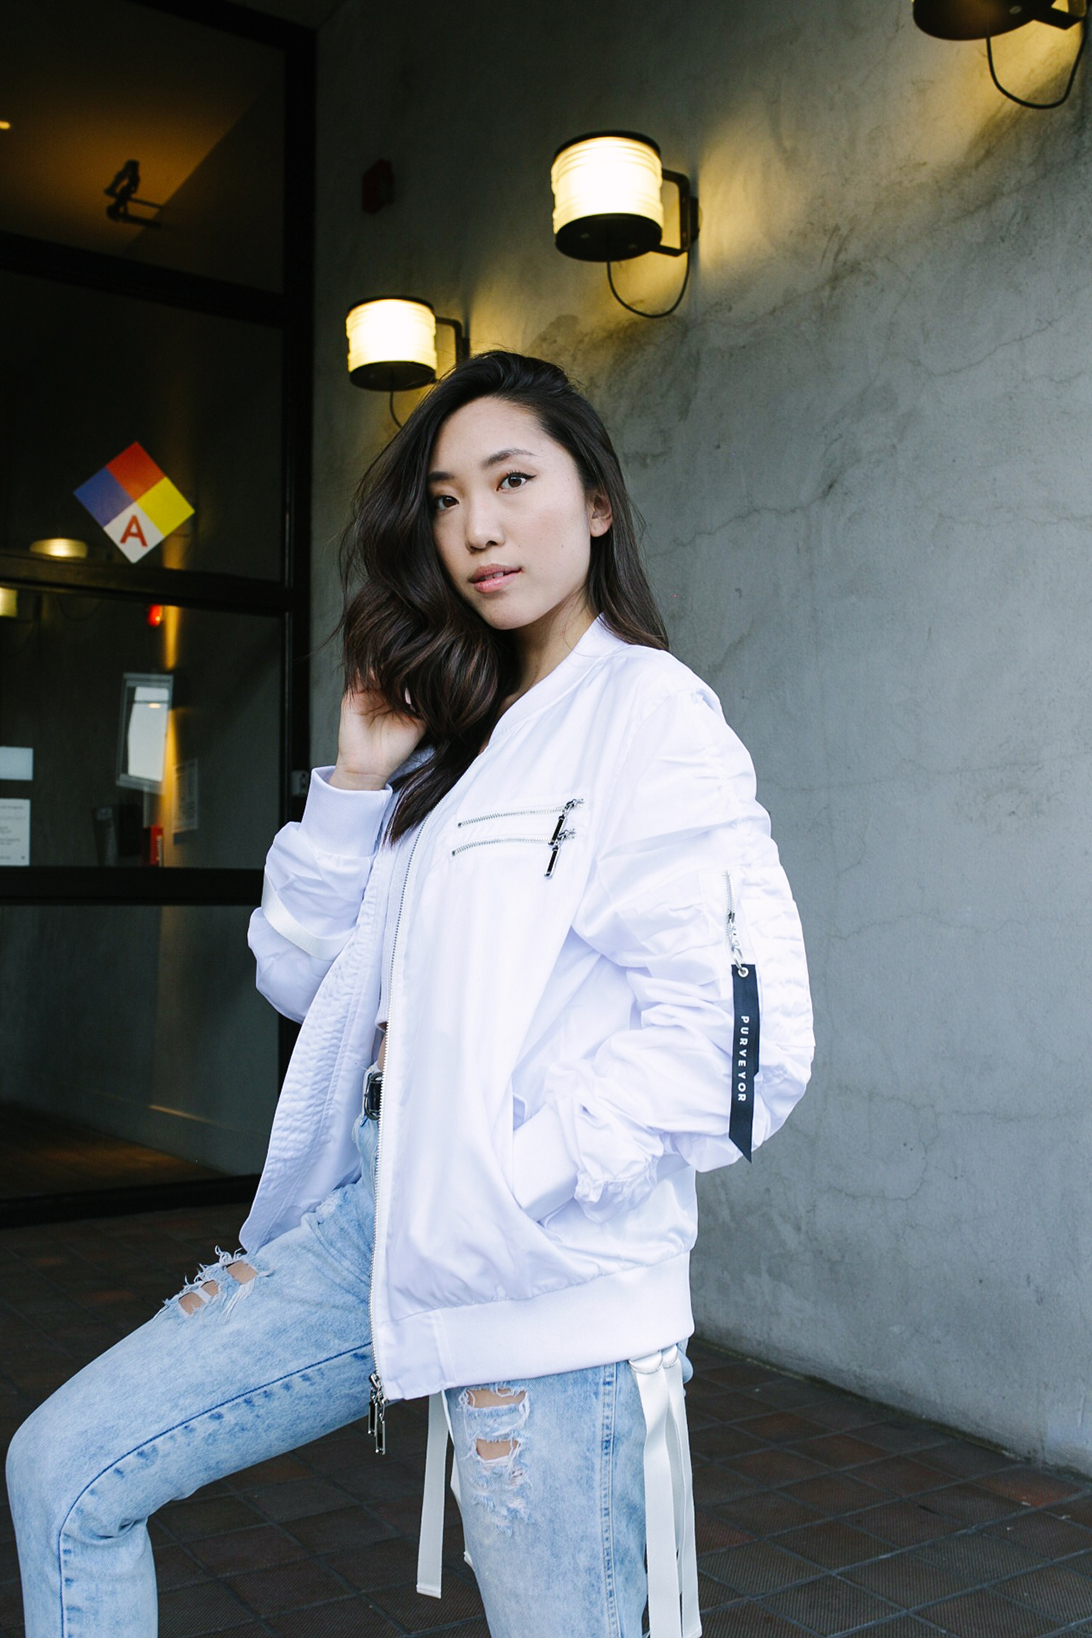 Purveyor Clothing – PVYR Ft. Jinny Im By Allie Norado Photography Los Angeles Style Shoot